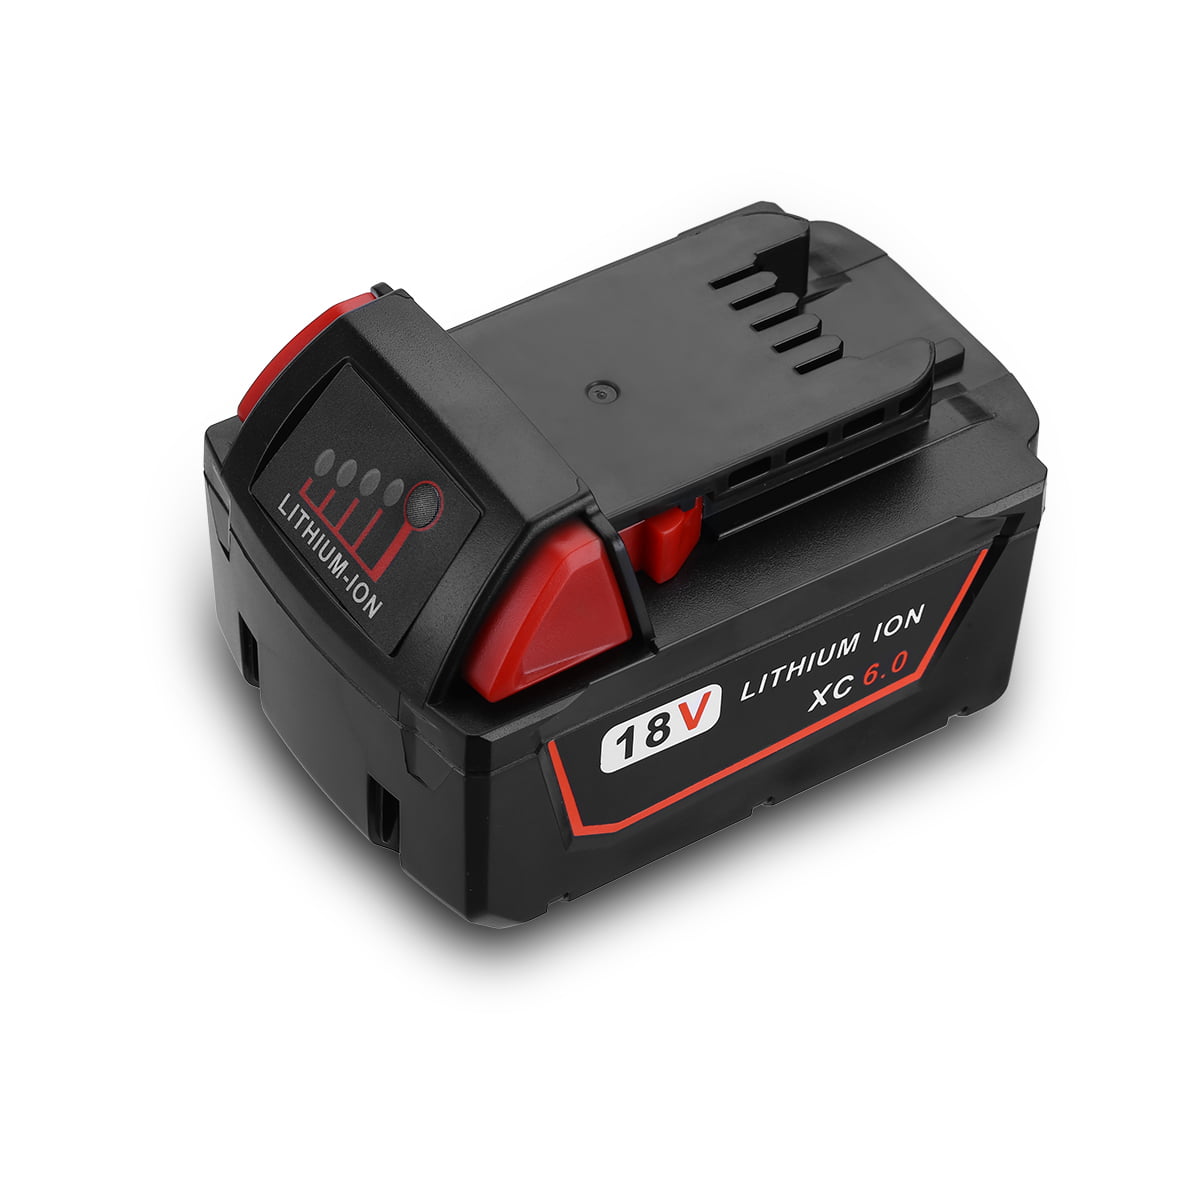 18V 6.0Ah Lithium XC Replace Battery For Milwaukee M18 48-11-1850 and Charger 